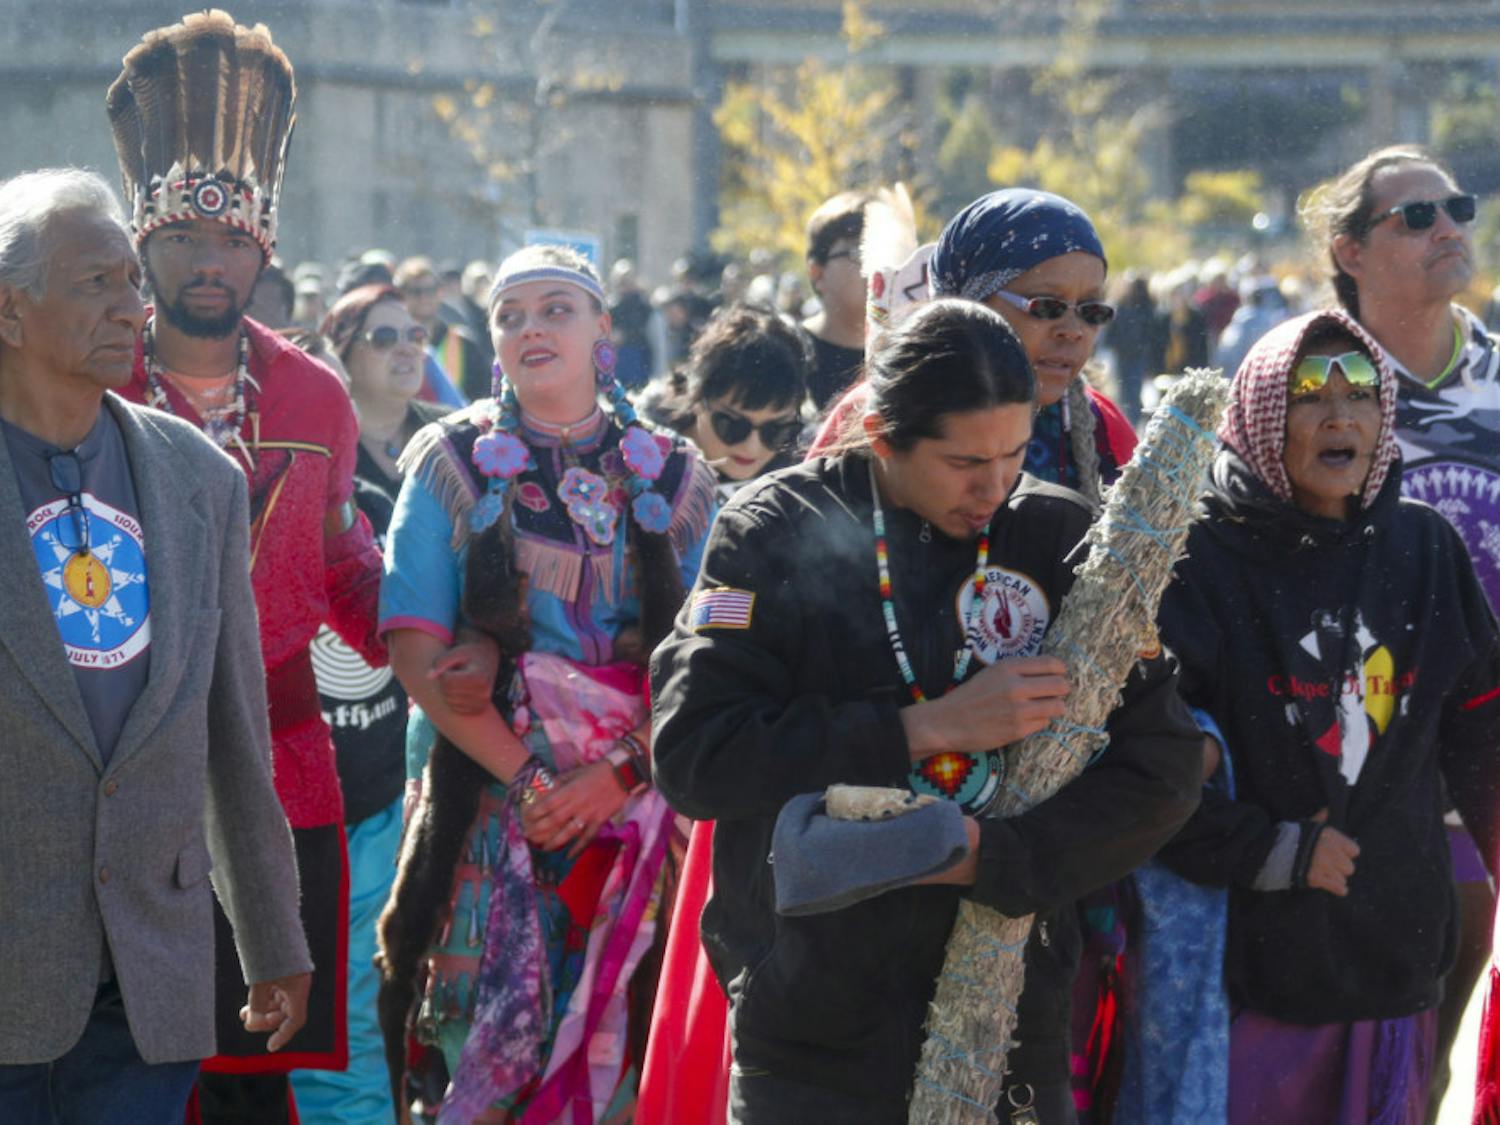 A group of indigenous peoples lead a march of protestors against fracking and shale gas through Point State Park before a ceremony to bless the three rivers, Wednesday, Oct. 23, 2019, in Pittsburgh. The group is protesting before President Donald Trump is to speak at at the Shale Insight Conference Wednesday afternoon. (AP Photo/Keith Srakocic)